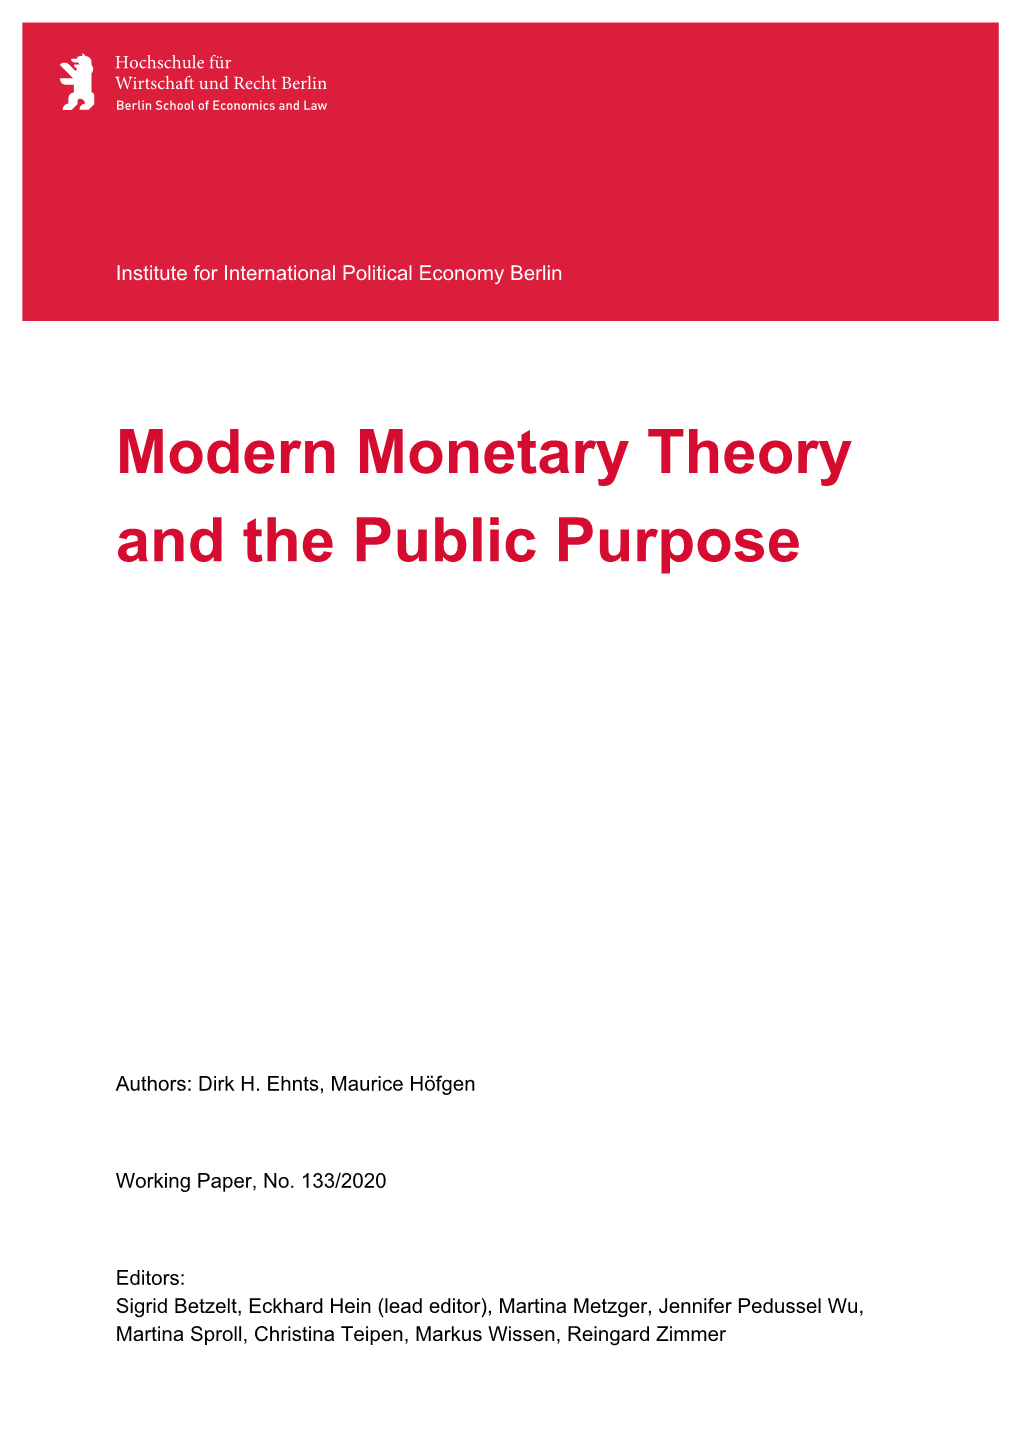 Modern Monetary Theory and the Public Purpose